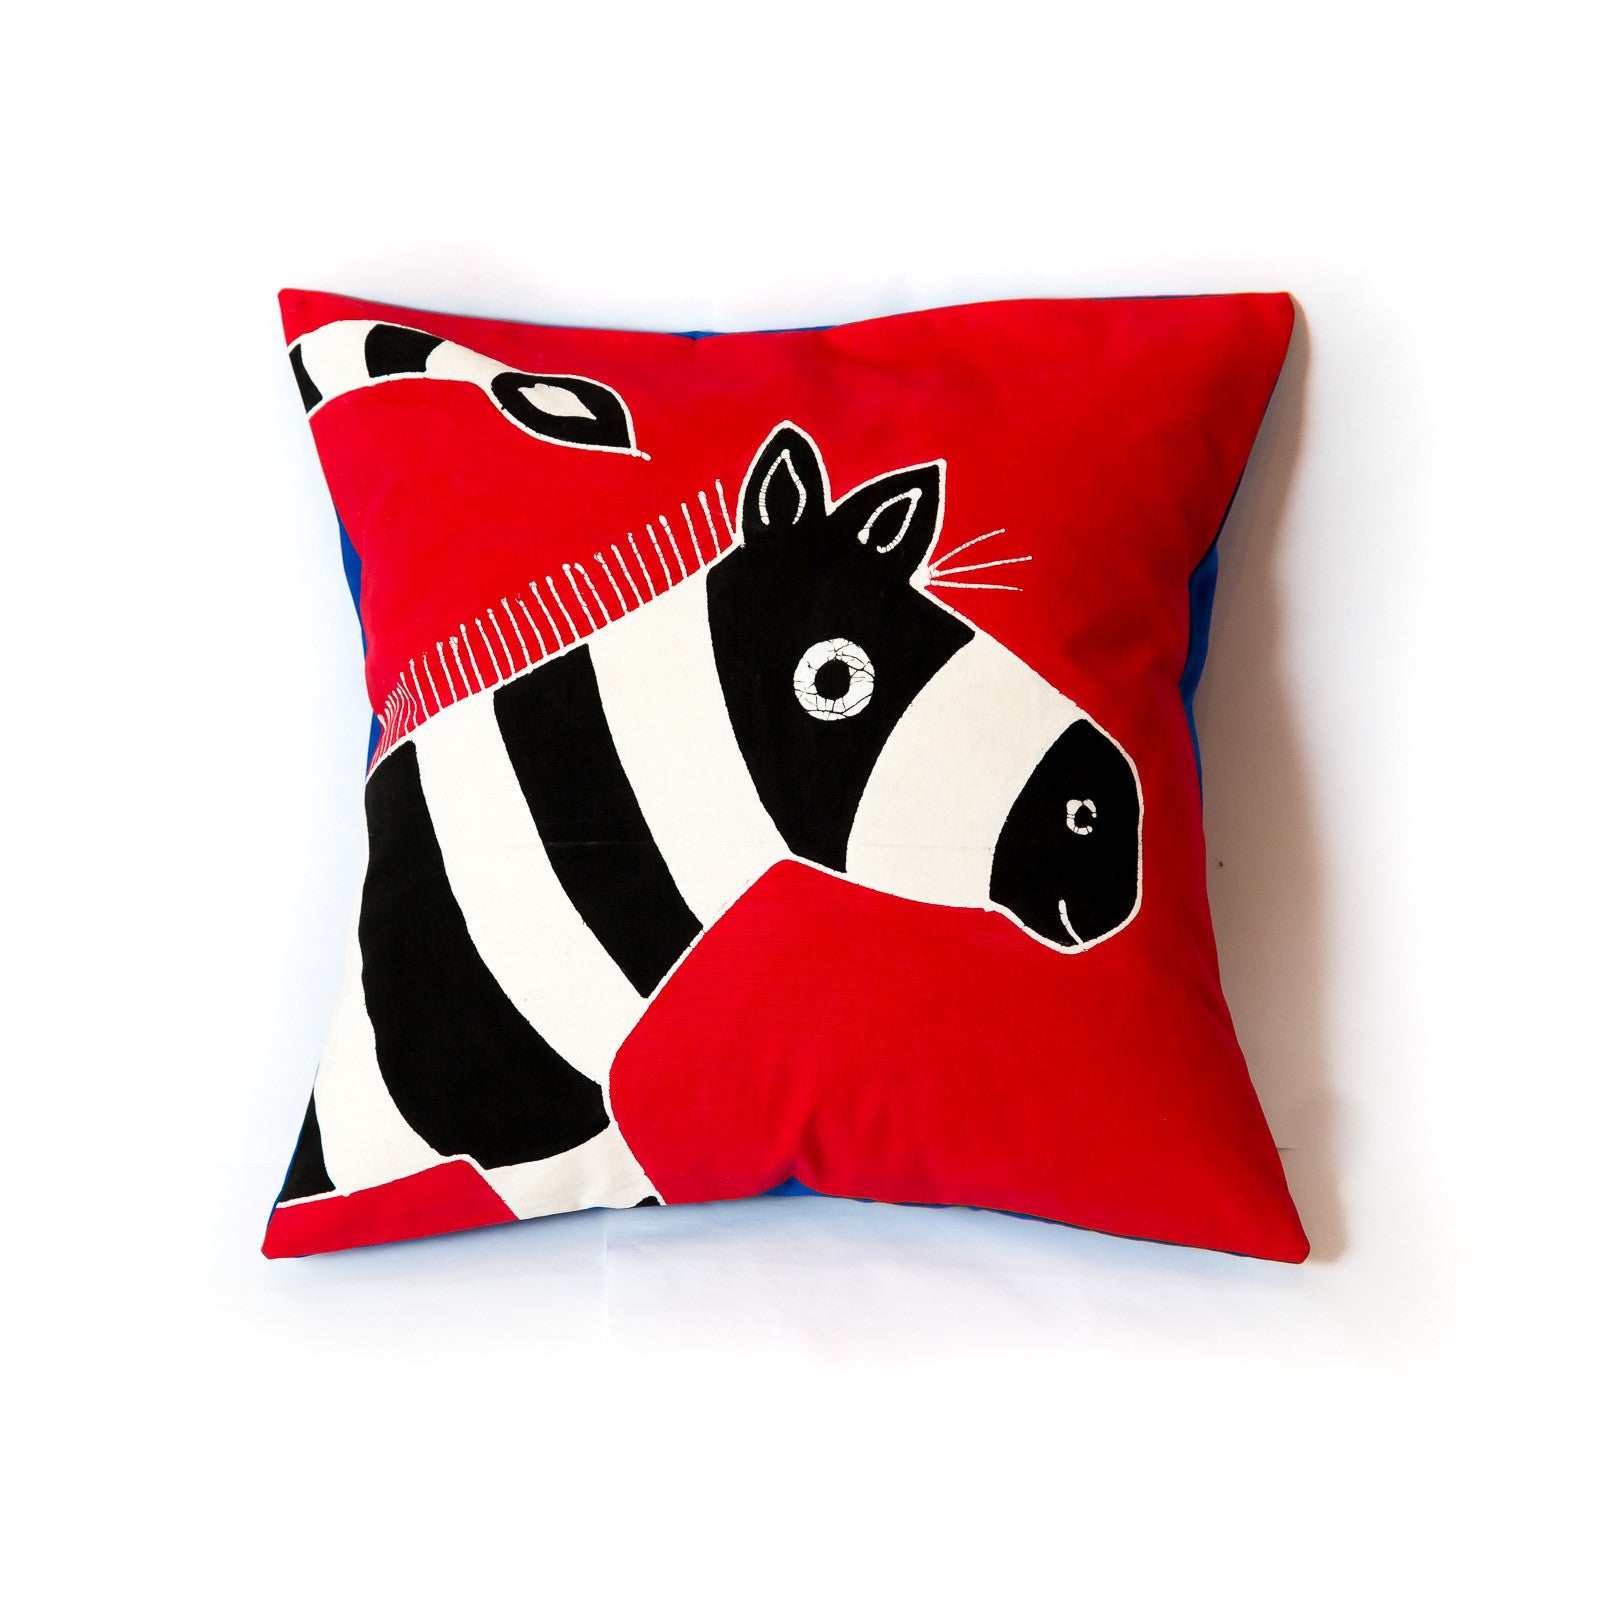 Safari Fun Zebra Cushion Cover - Hand Painted by TRIBAL TEXTILES - Handcrafted Home Decor Interiors - African Made